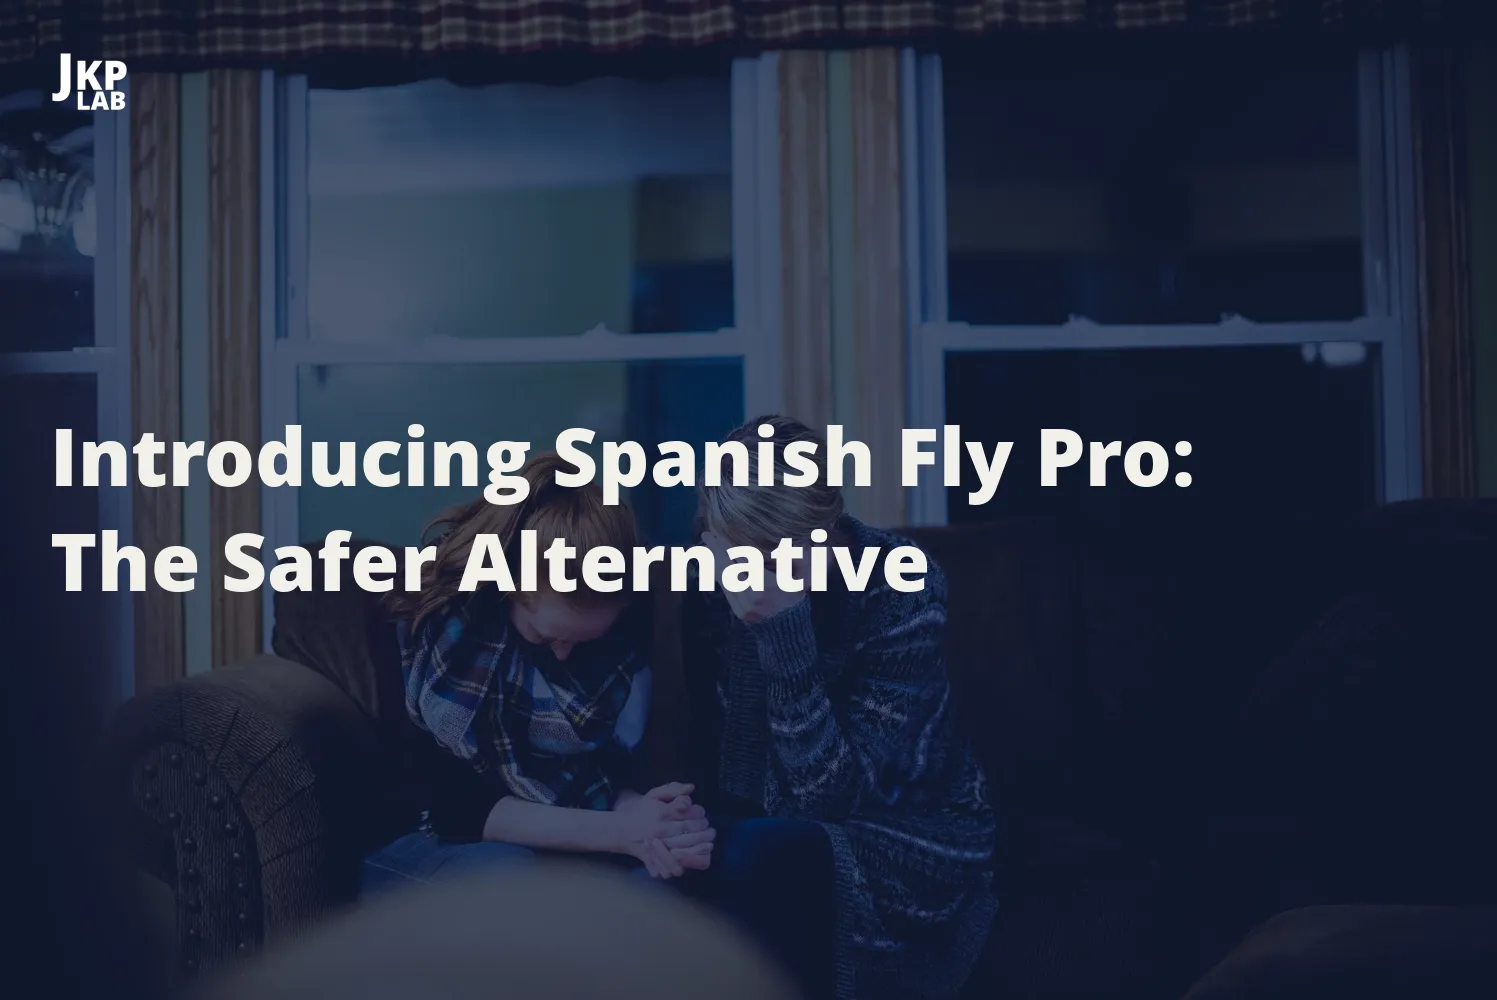 Comparing Spanish Fly and Spanish Fly Pro